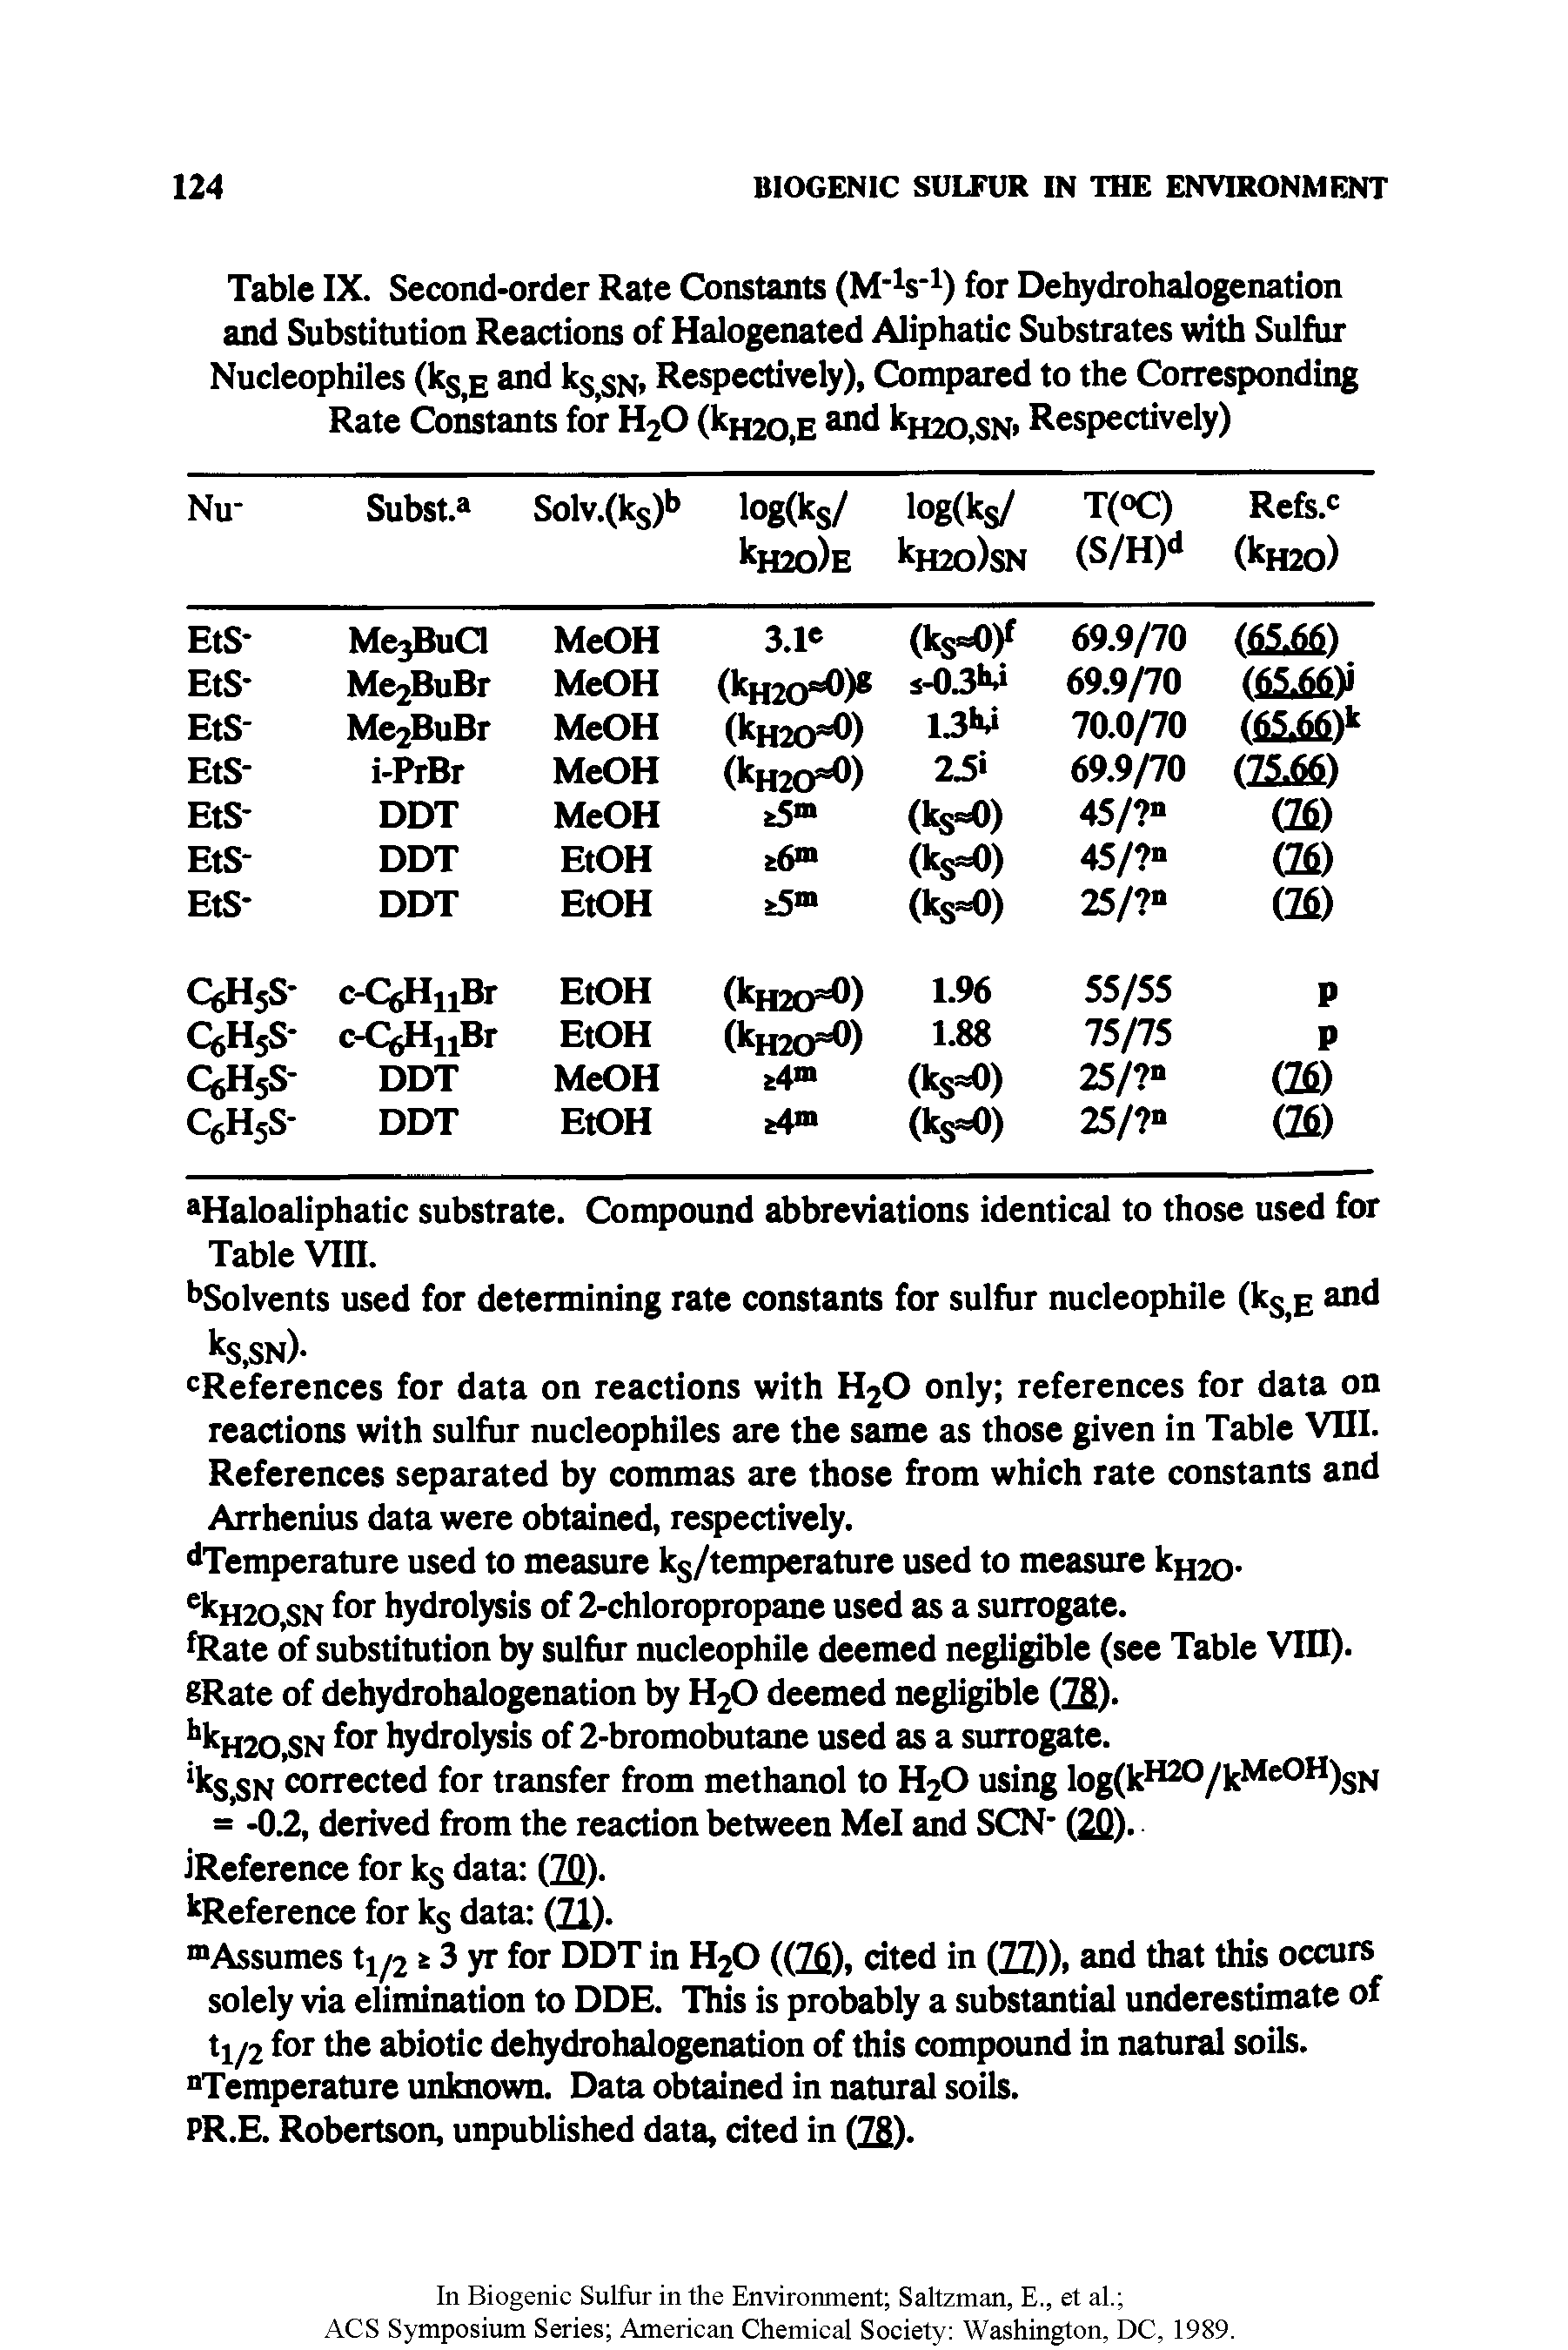 Table IX. Second-order Rate Constants (M V1) for Dehydrohalogenation and Substitution Reactions of Halogenated Aliphatic Substrates with Sulfur Nucleophiles (ks>E and kS(SN> Respectively), Compared to the Corresponding Rate Constants for H20 (kn20,E d kH20,SN> Respectively)...